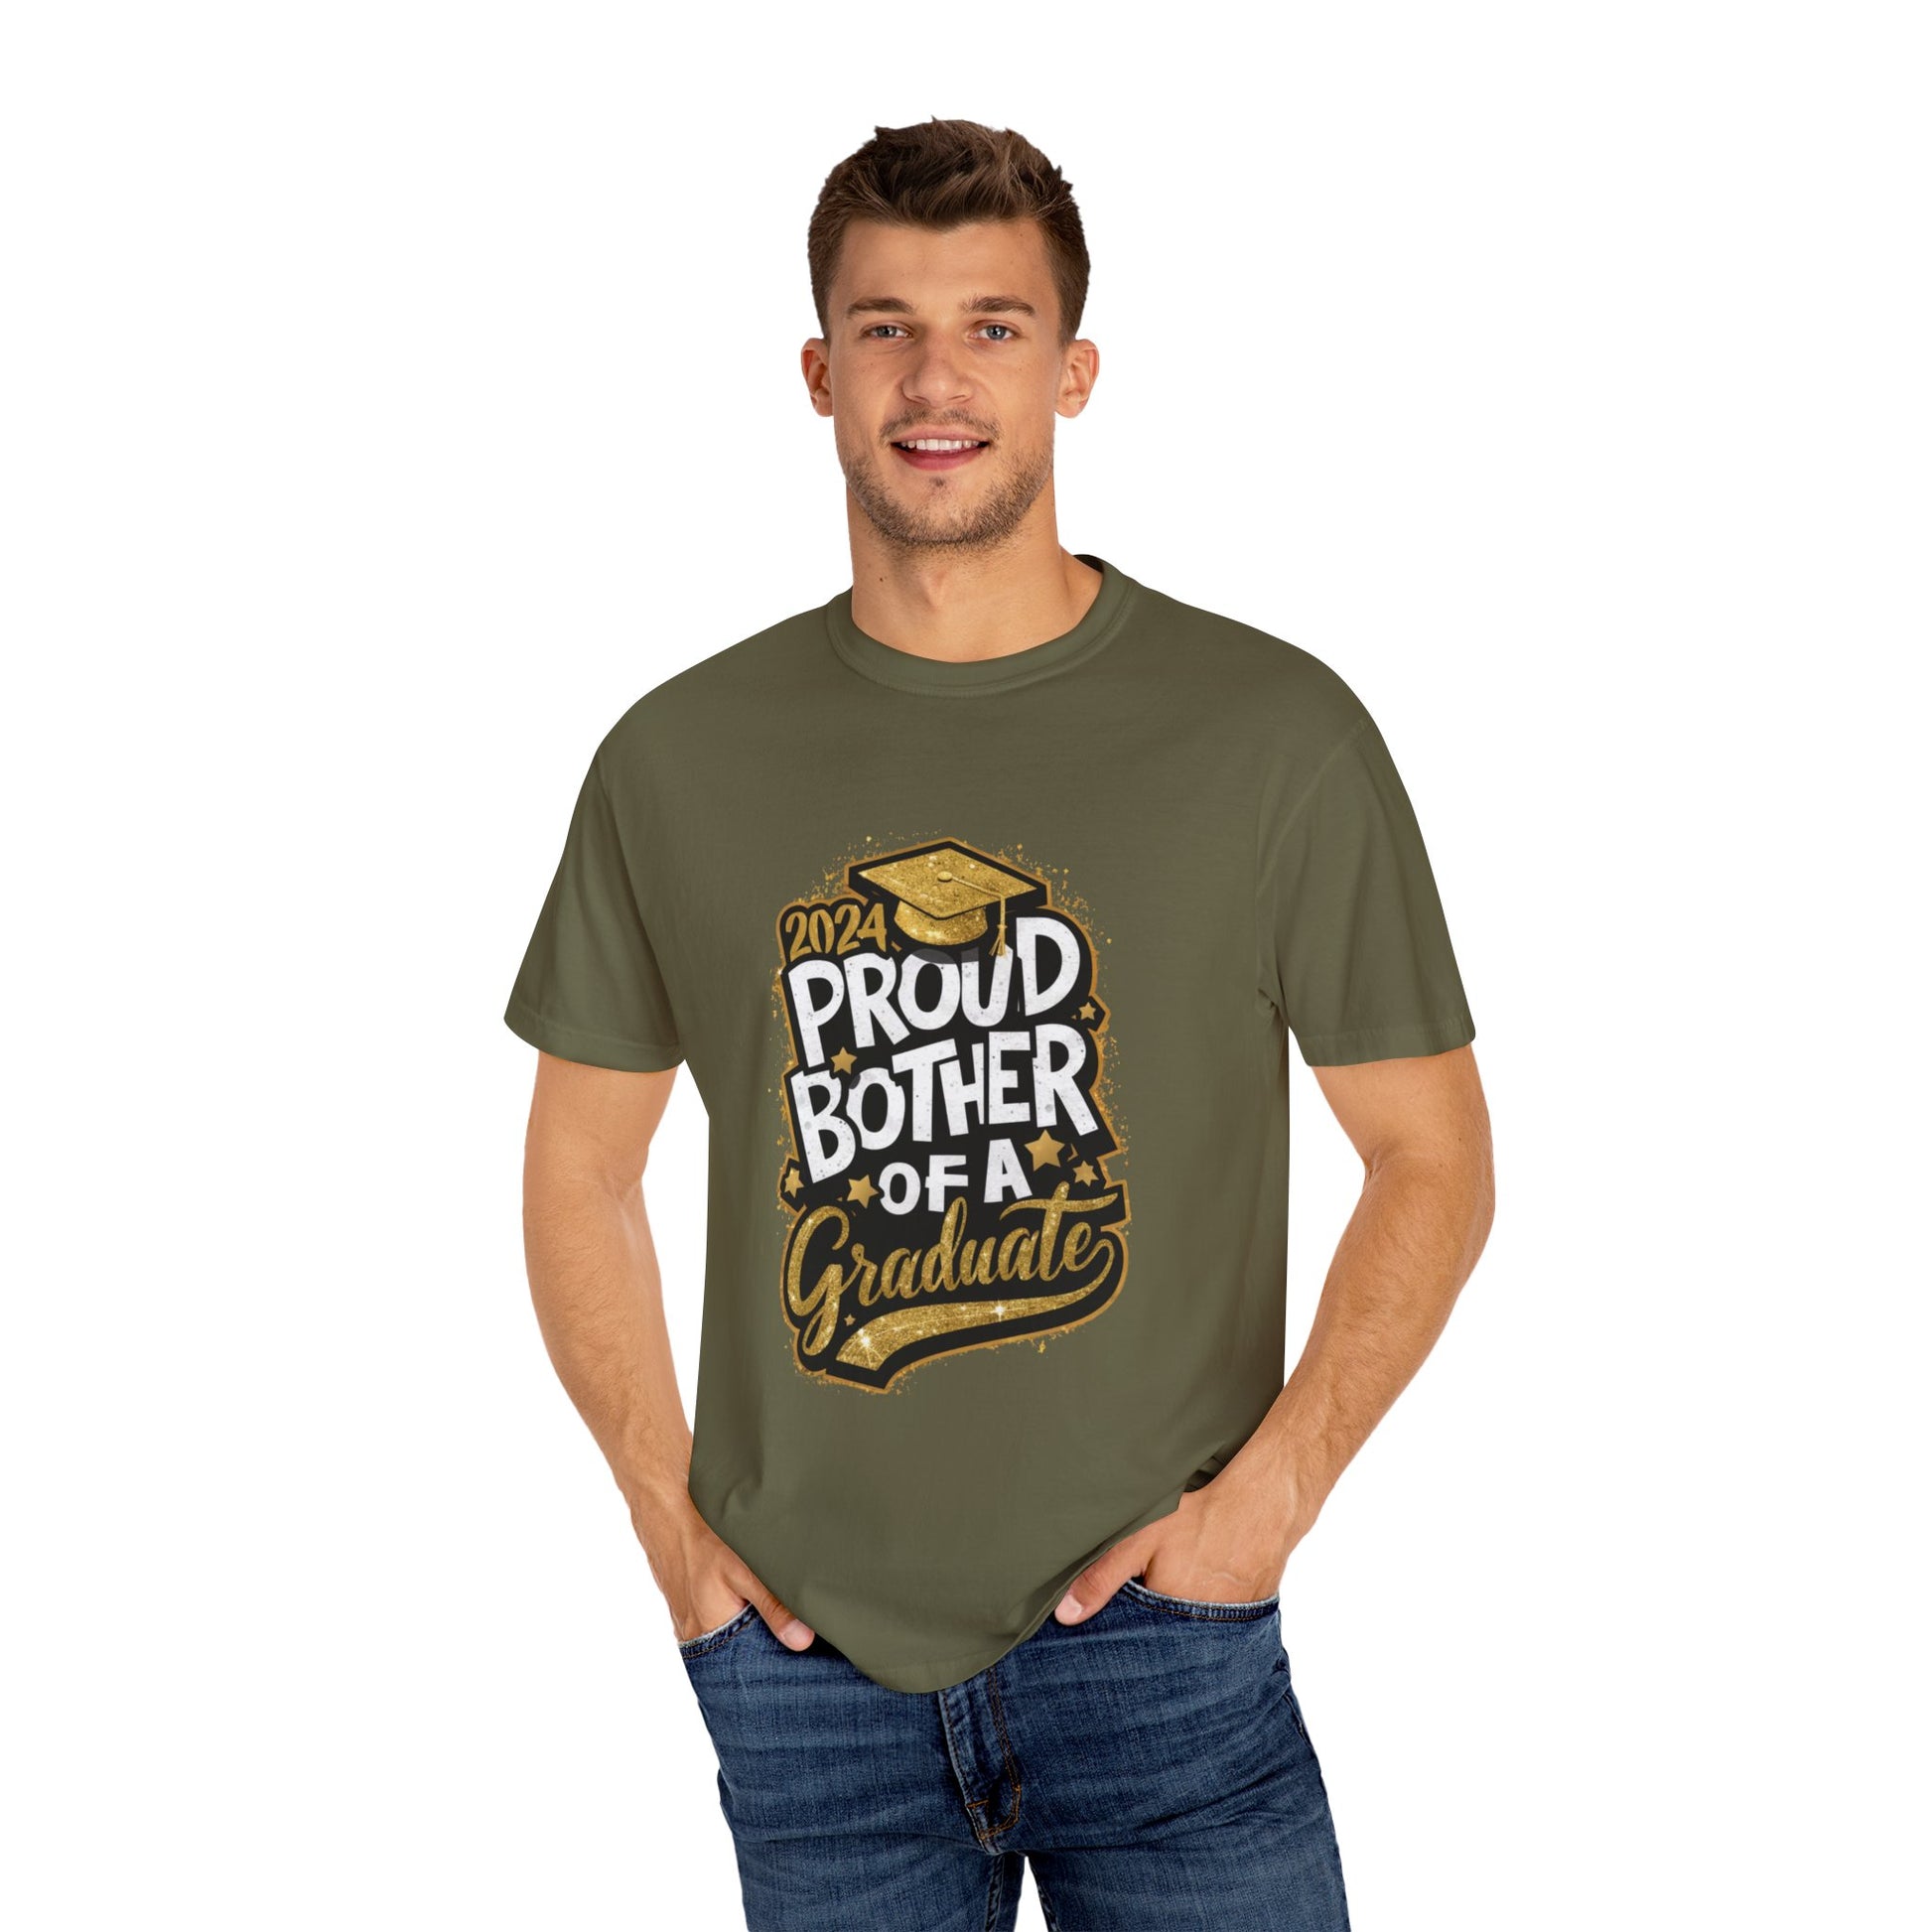 Proud Brother of a 2024 Graduate Unisex Garment-dyed T-shirt Cotton Funny Humorous Graphic Soft Premium Unisex Men Women Sage T-shirt Birthday Gift-54